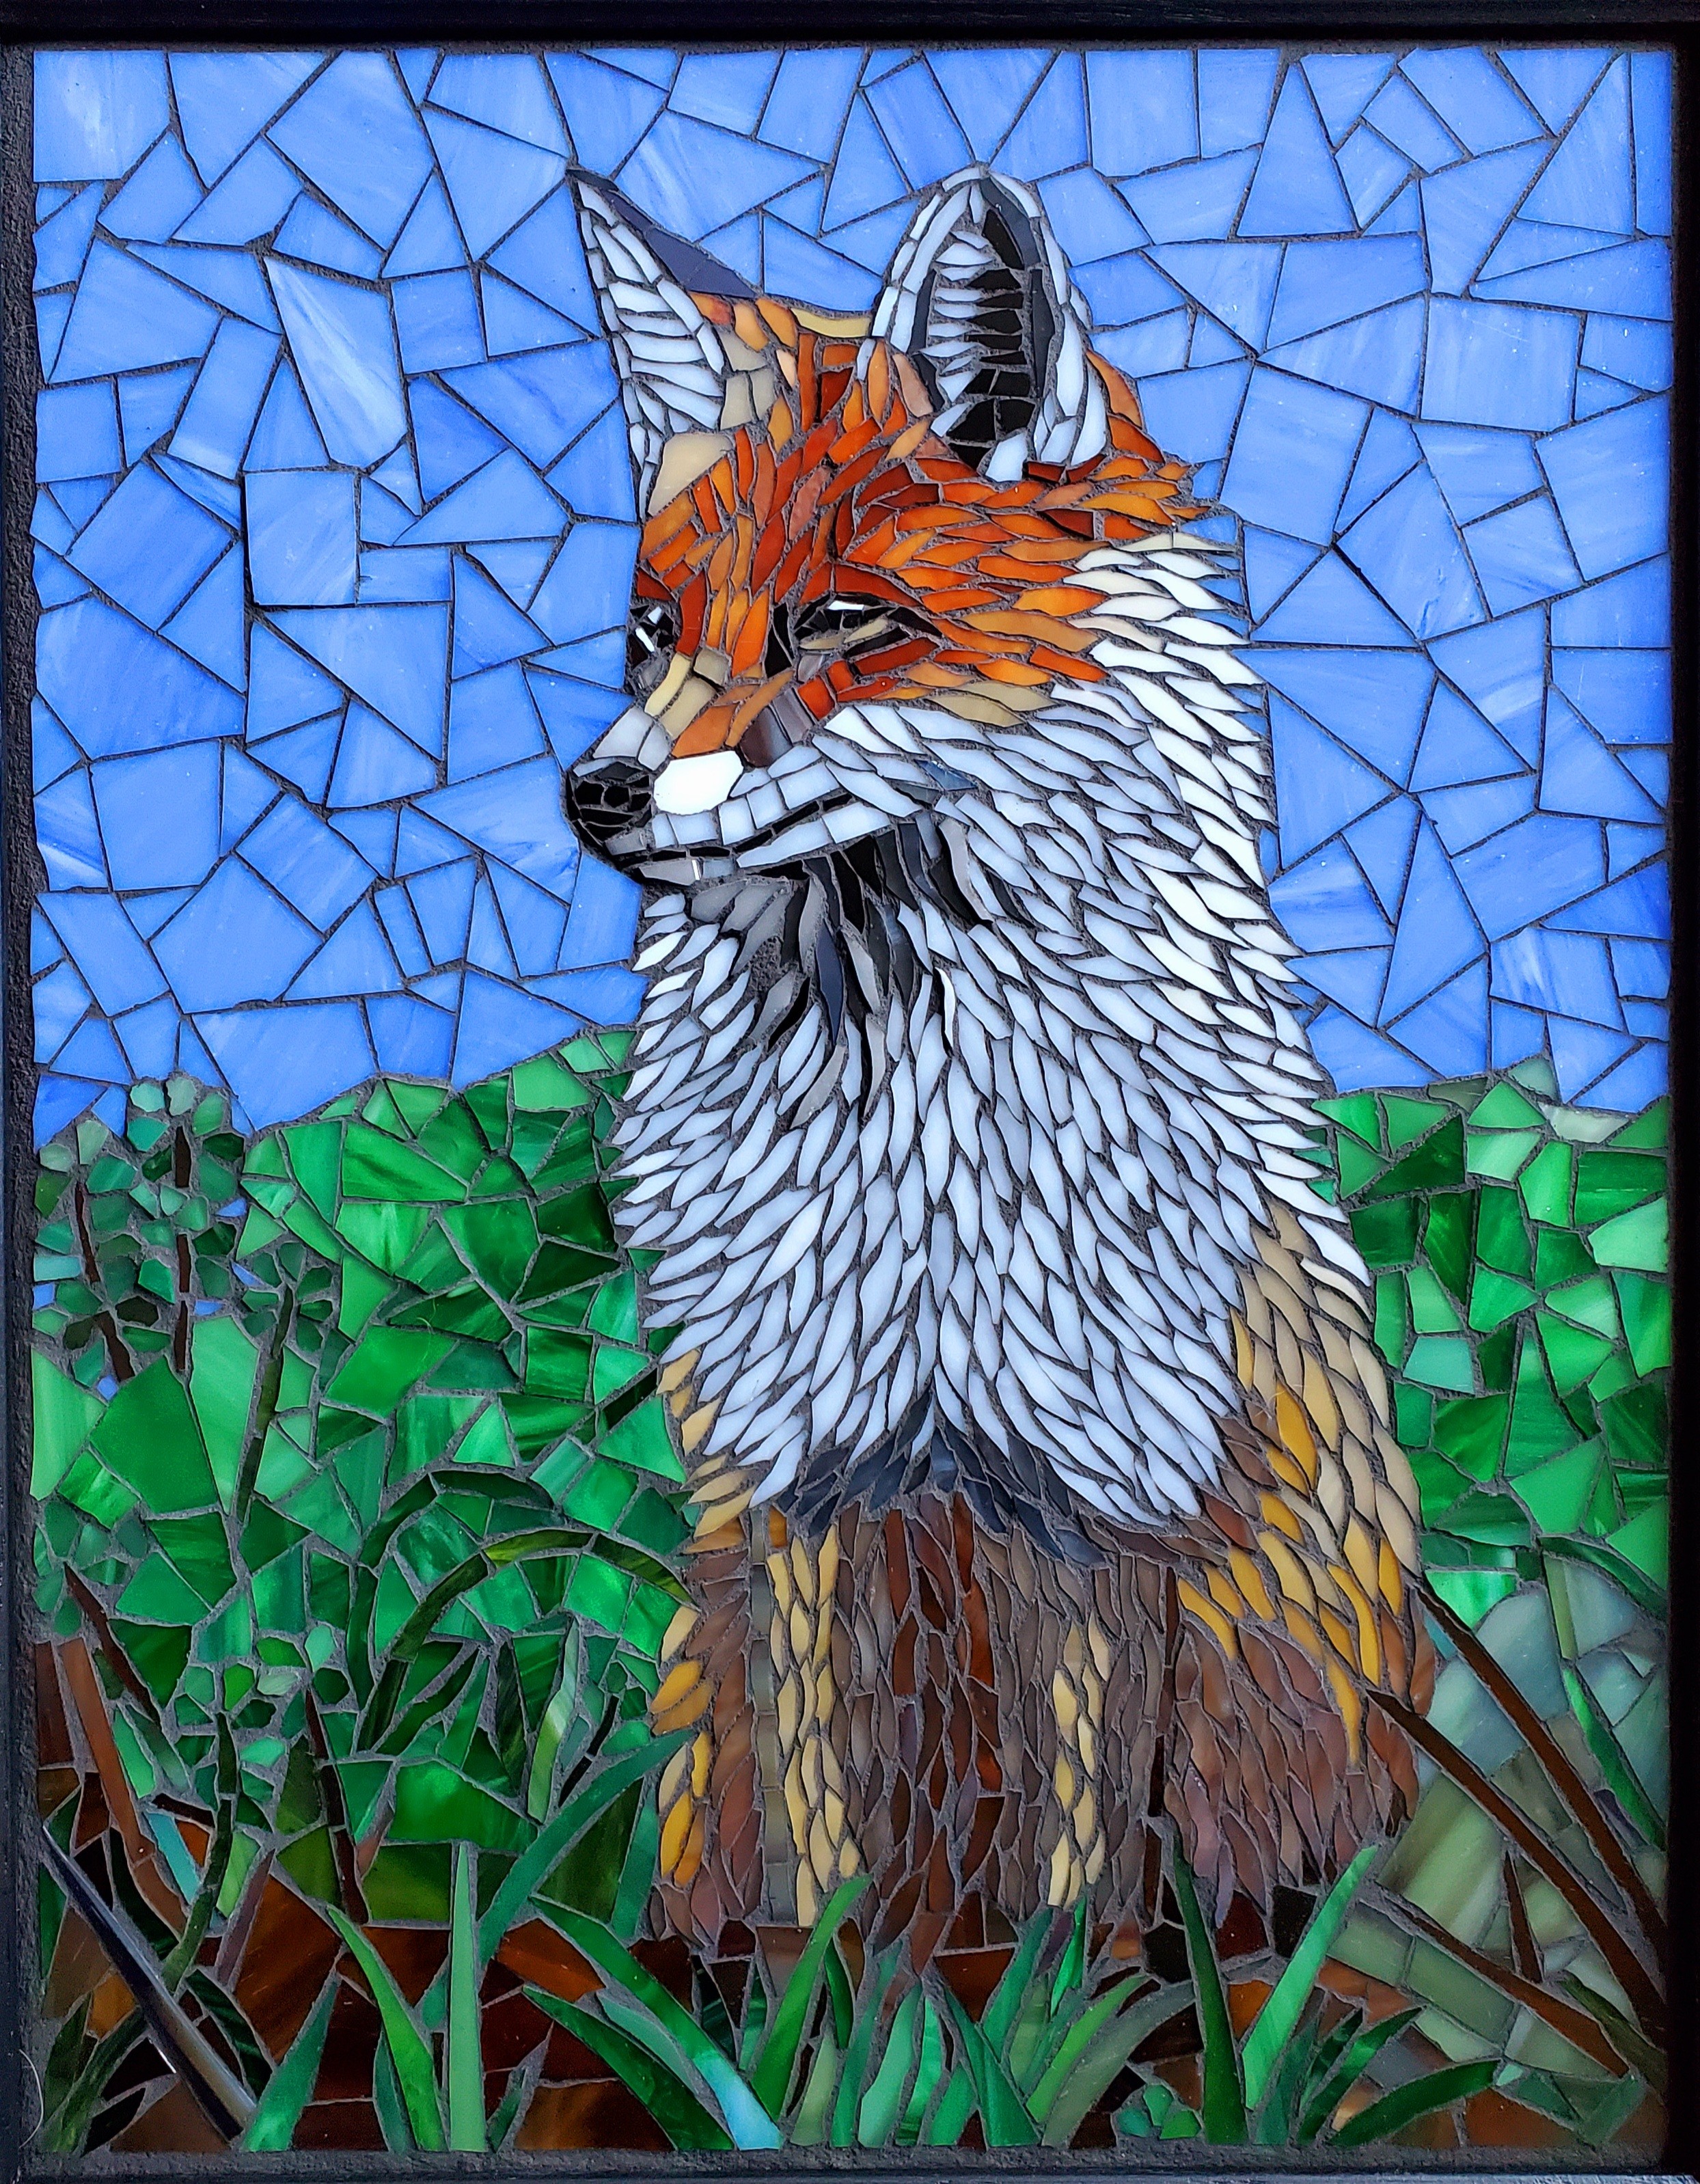 Red Fox Keeps Watch by Cathie Hendren - Glass mosaic